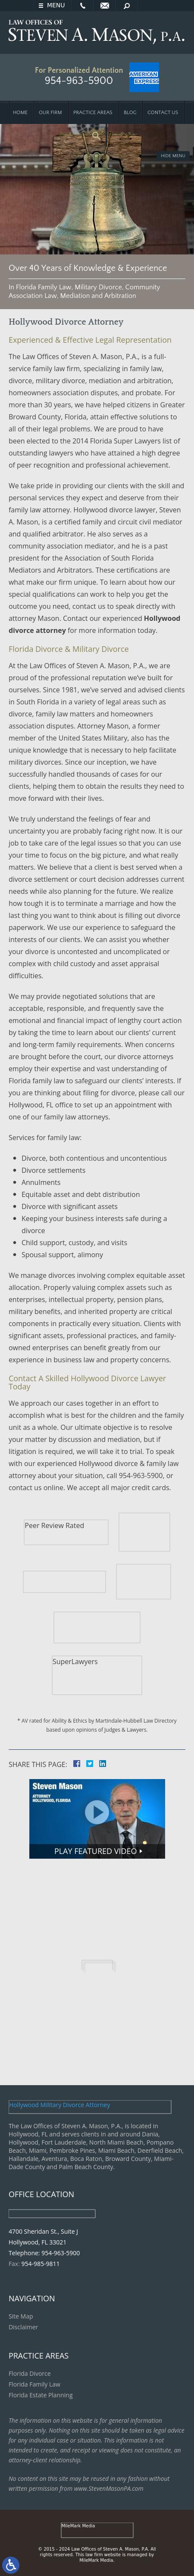 Law Offices of Steven A. Mason, P.A. - Hollywood FL Lawyers